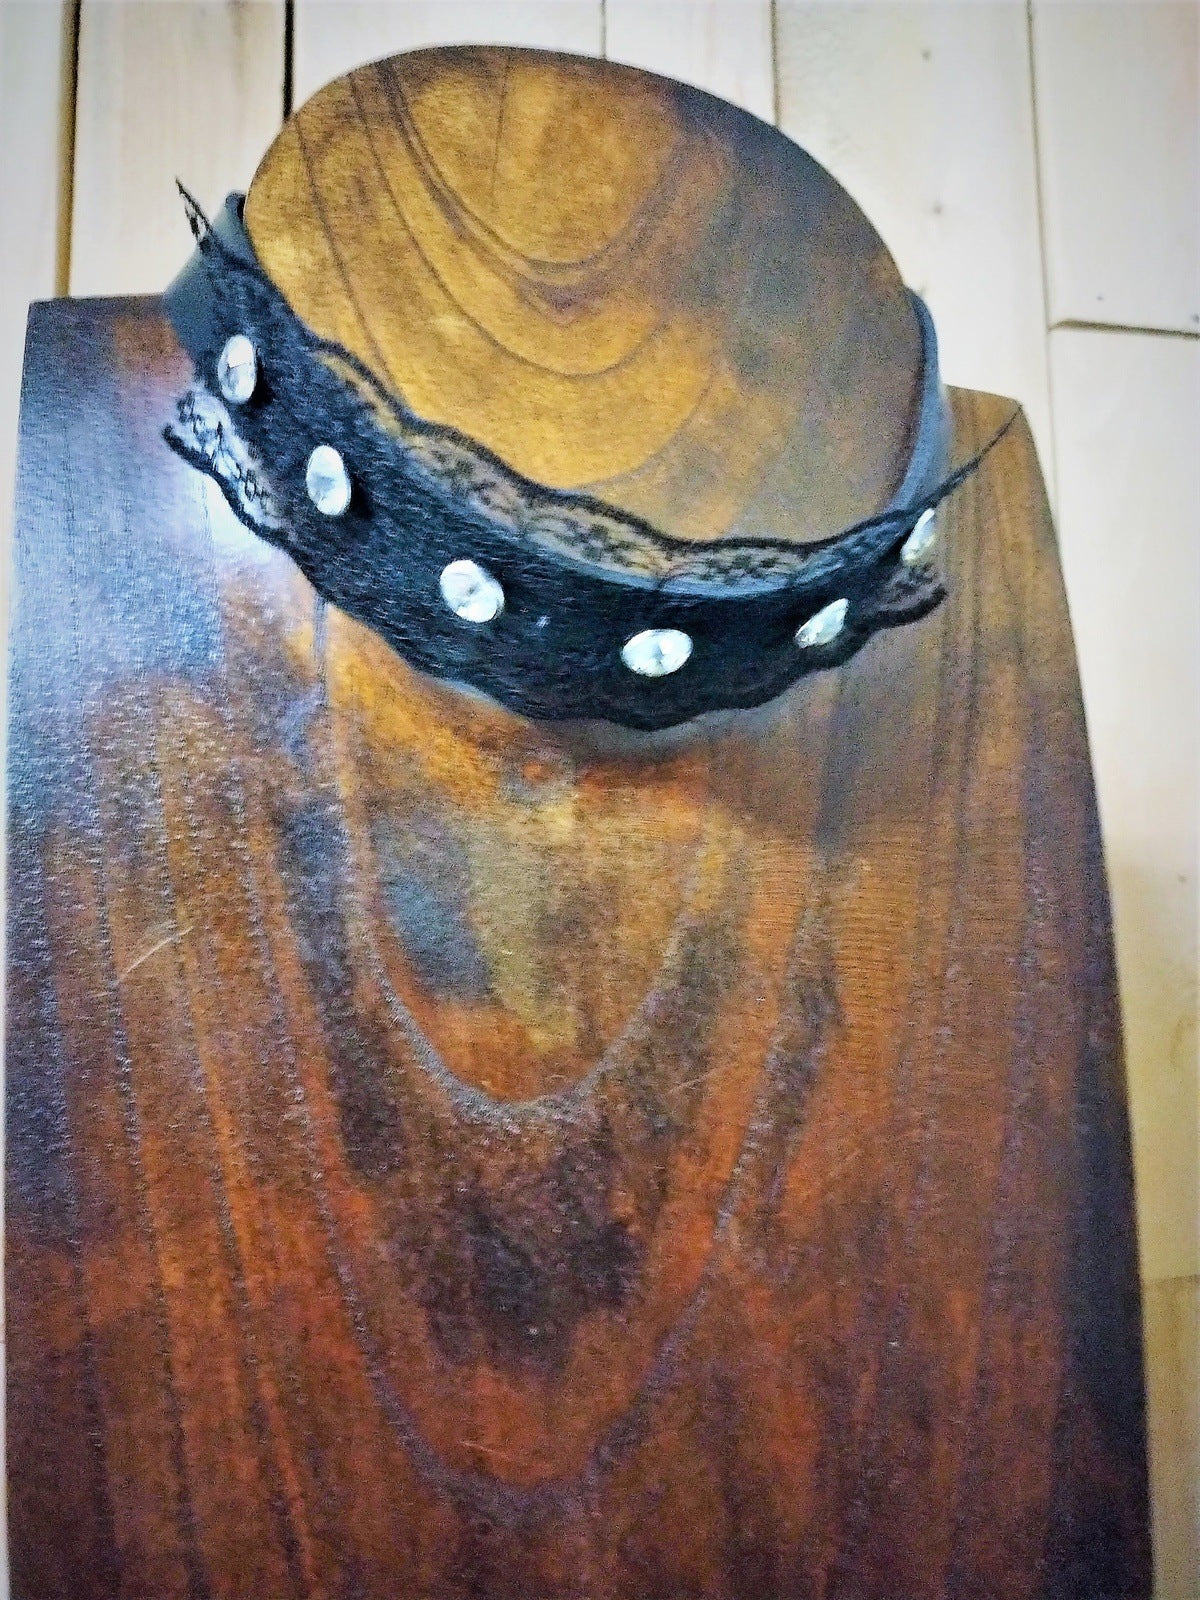 Black Vegan Leather Choker with Black Lace and rhinestones